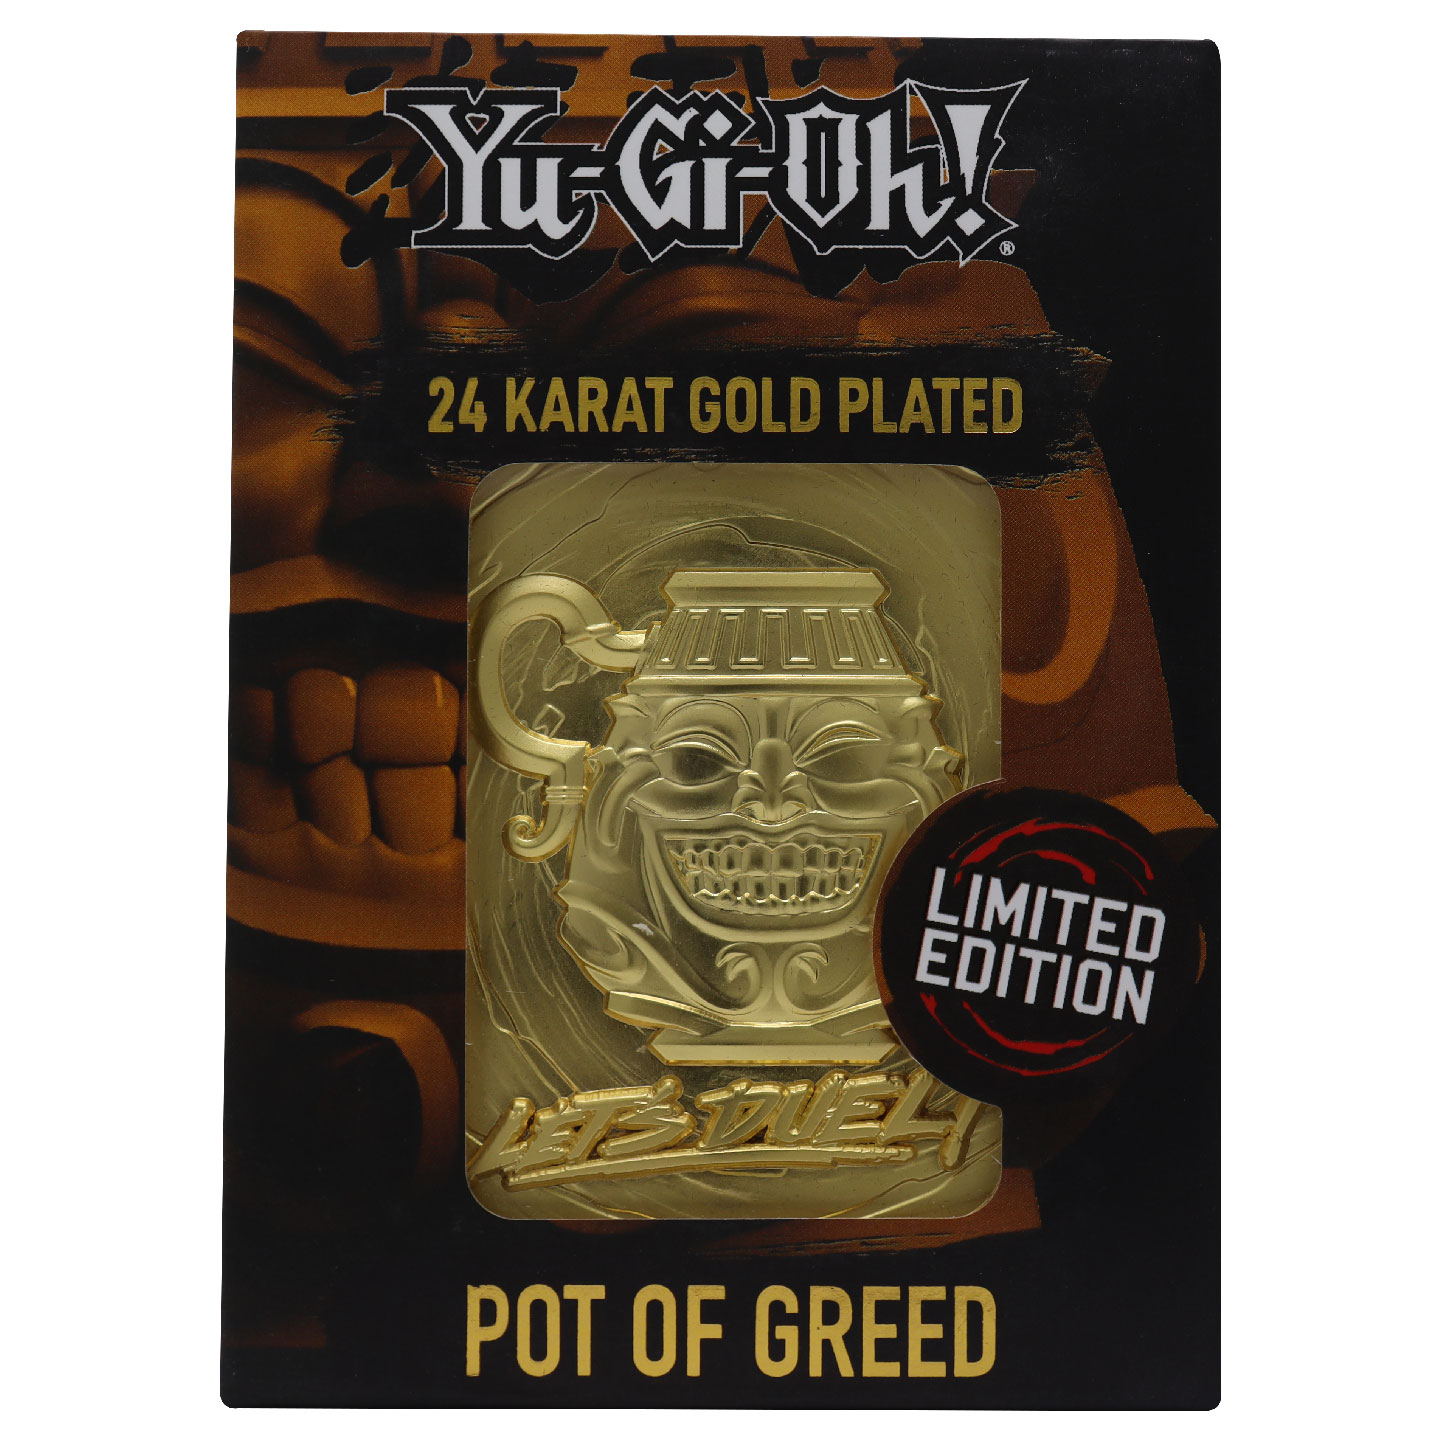 Limited Edition 24K Gold Plated Card Pot of Greed